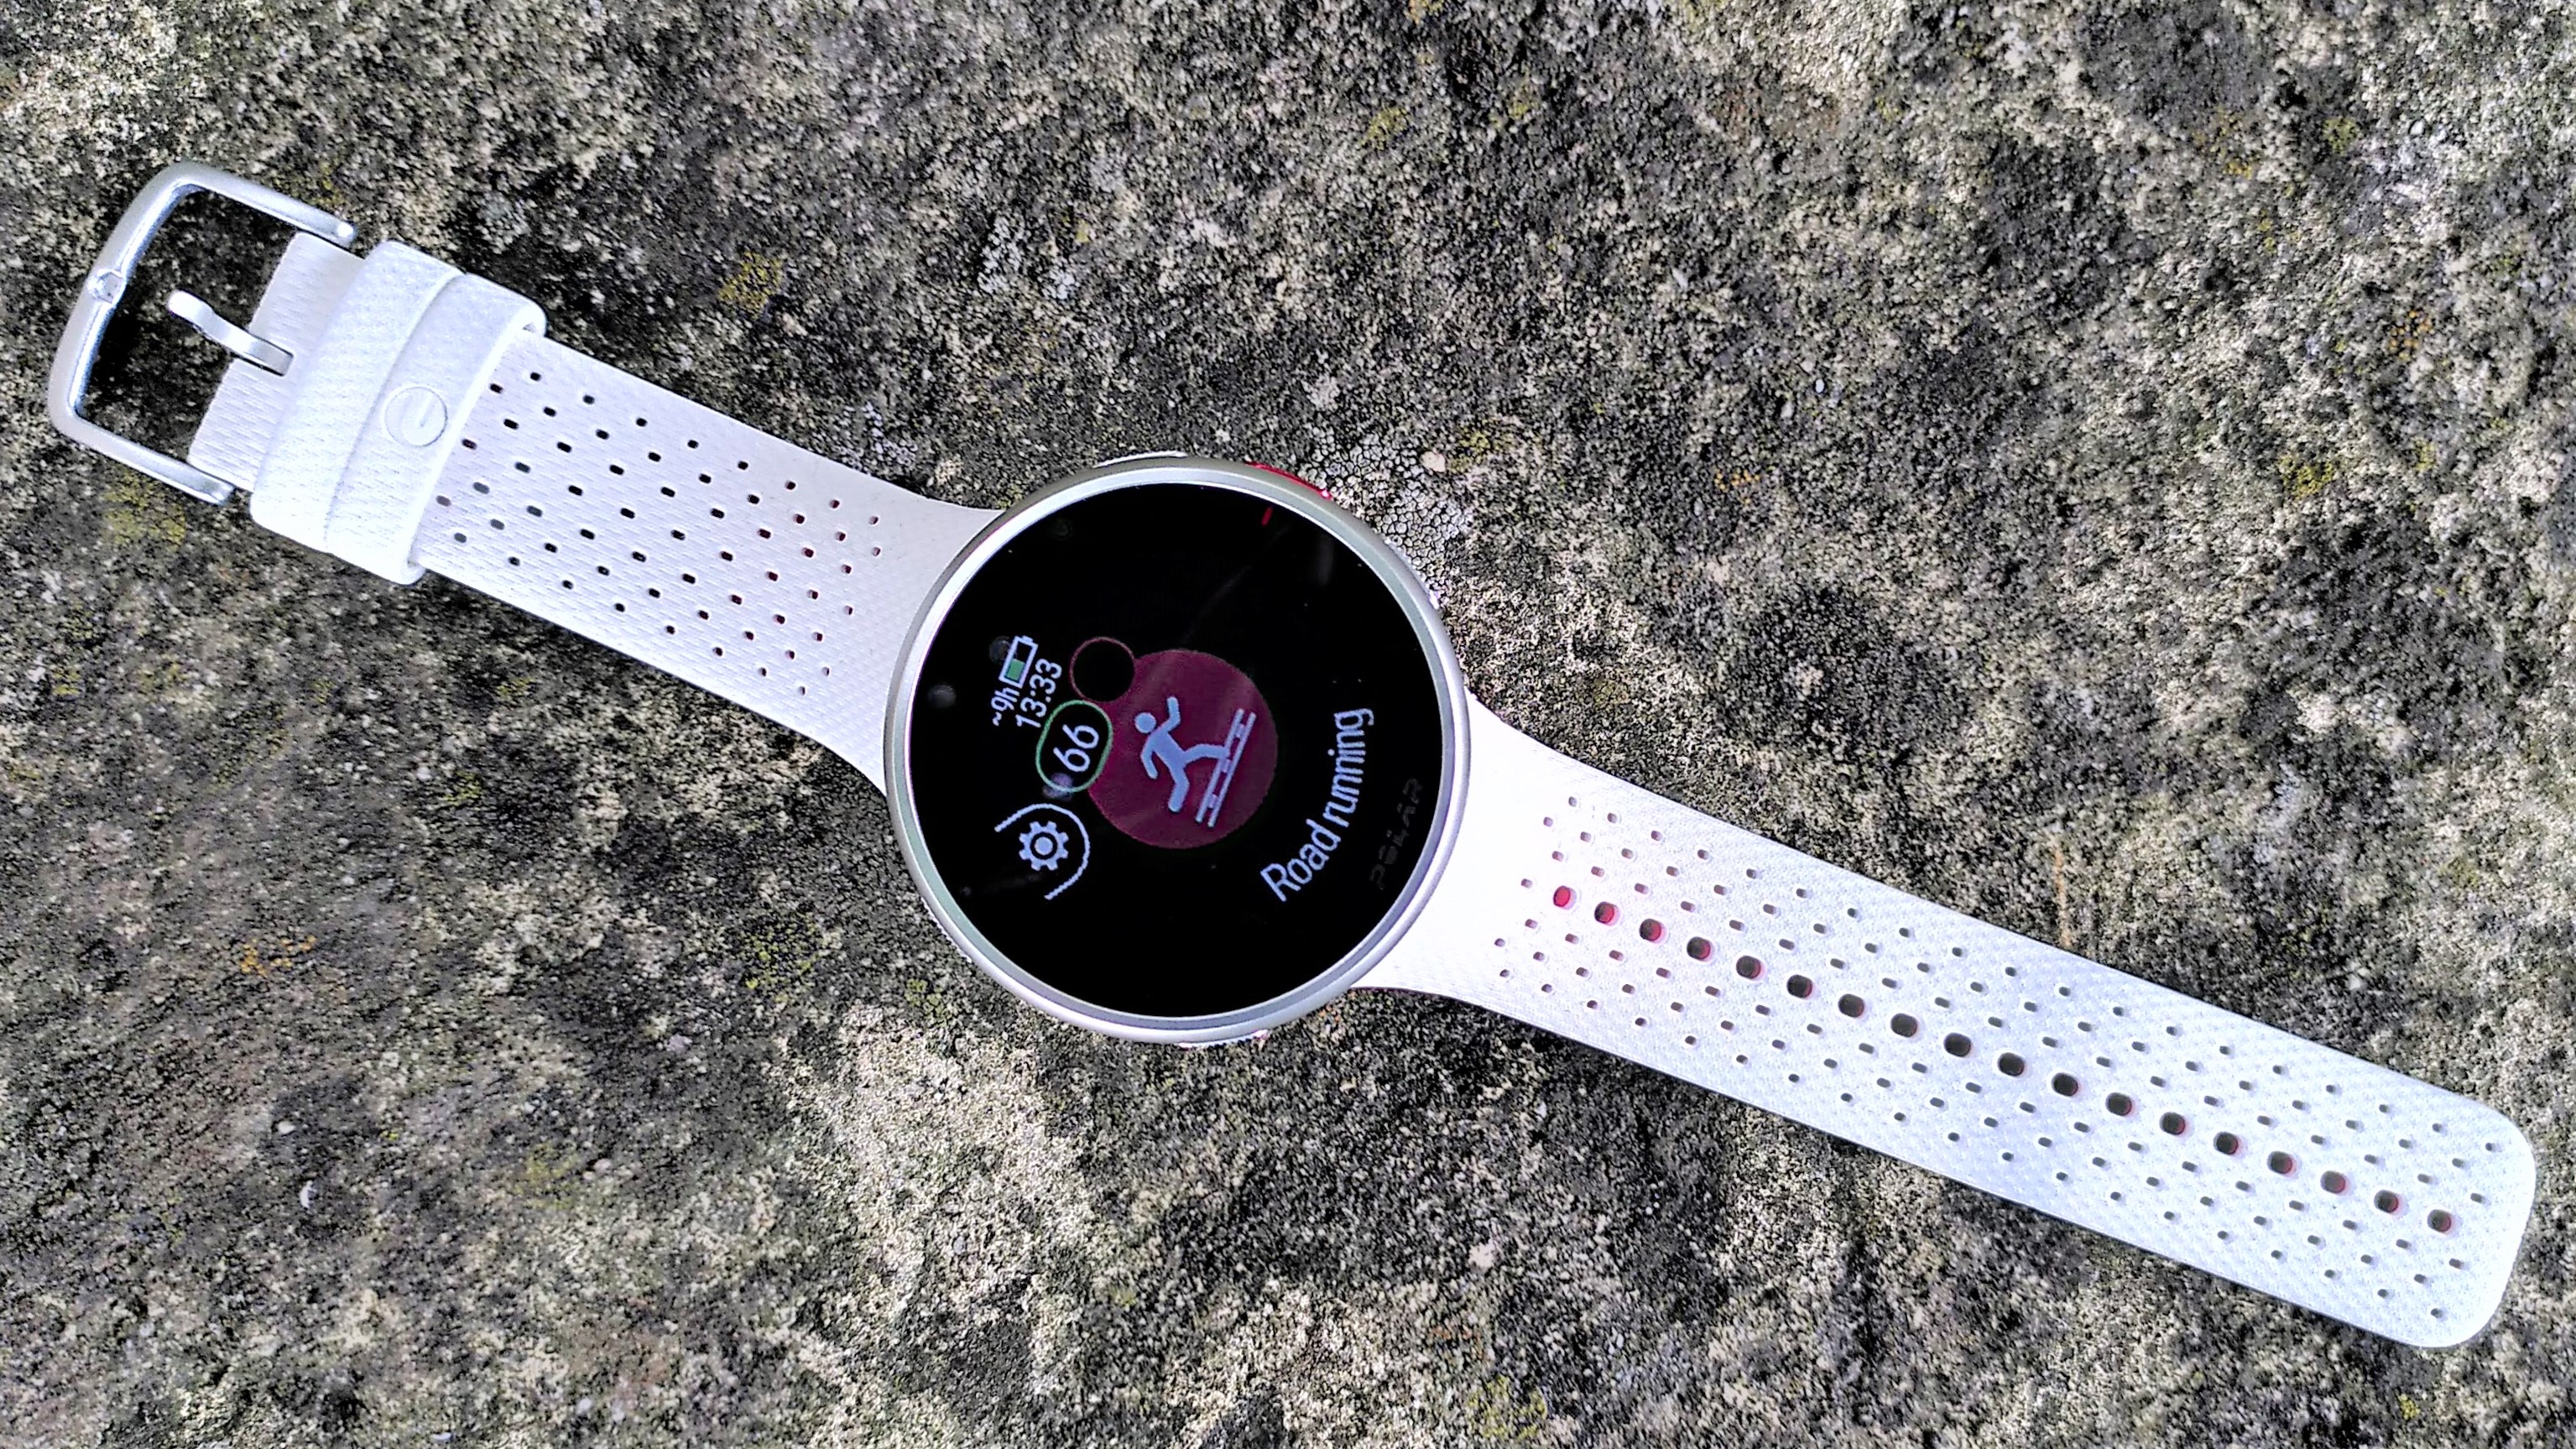 Polar Pacer Pro GPS Running Watch In-Depth Review